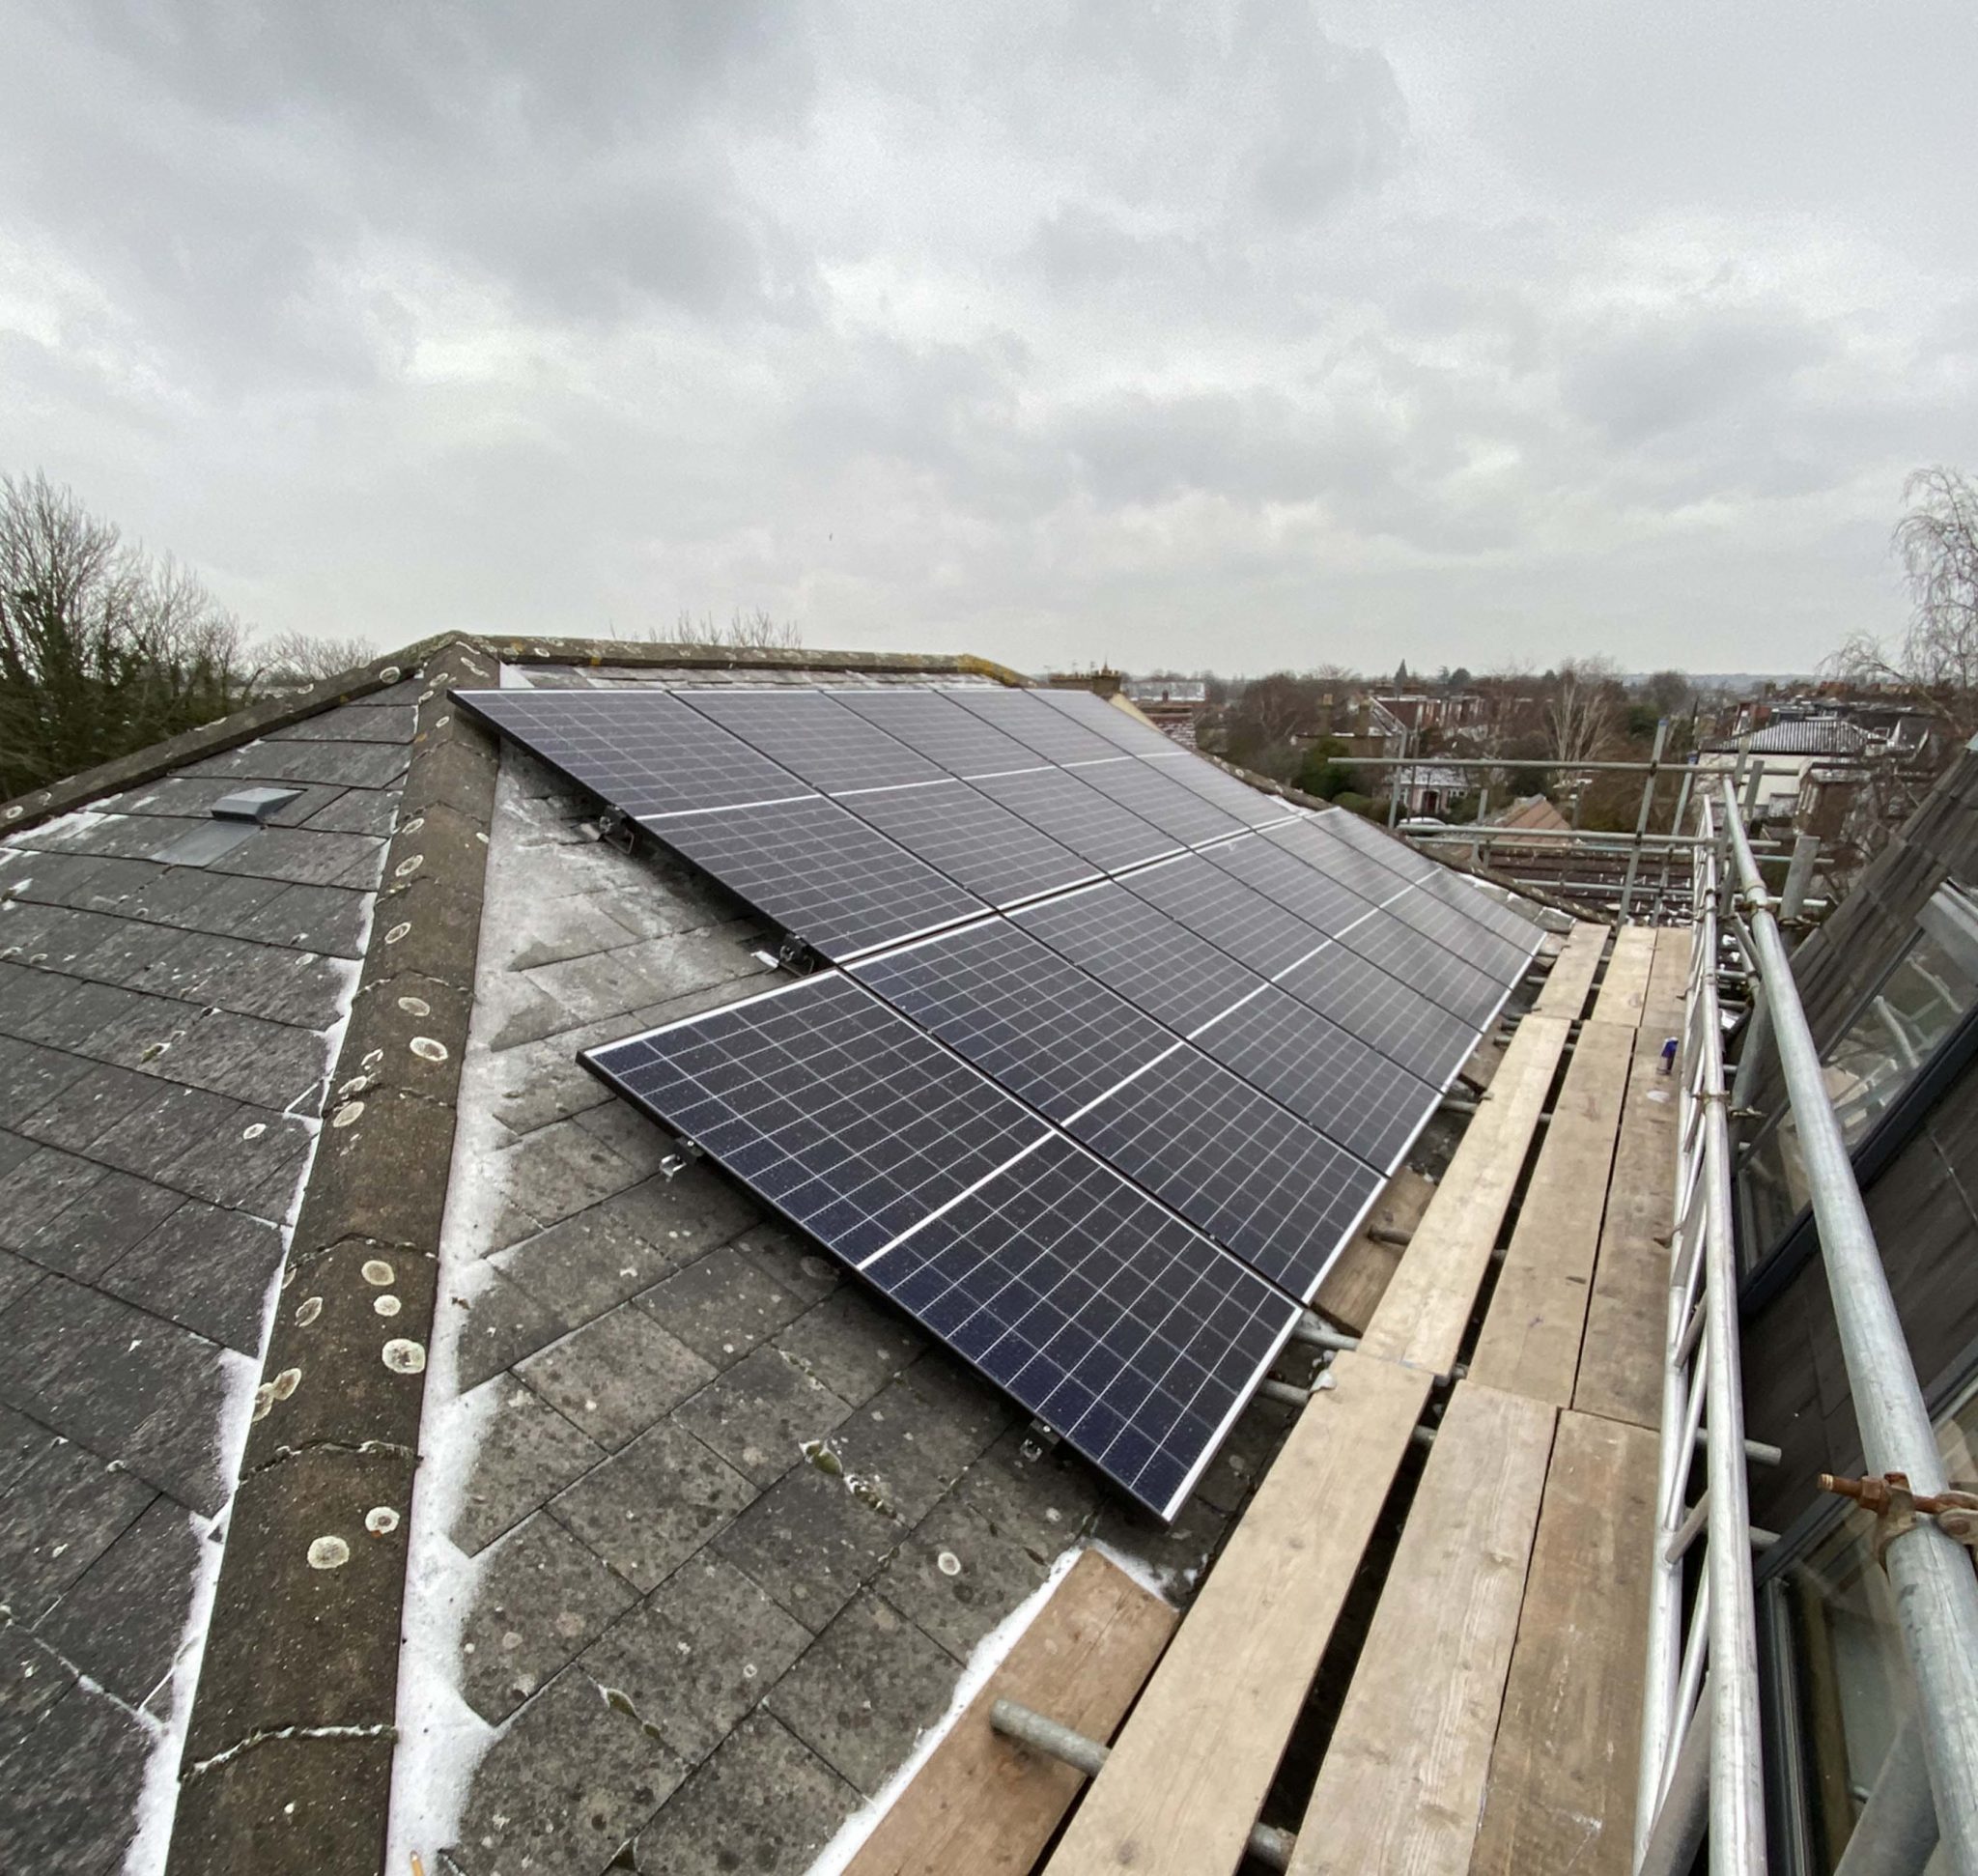 Domestic Solar Installation For One Of Our Clients In London!